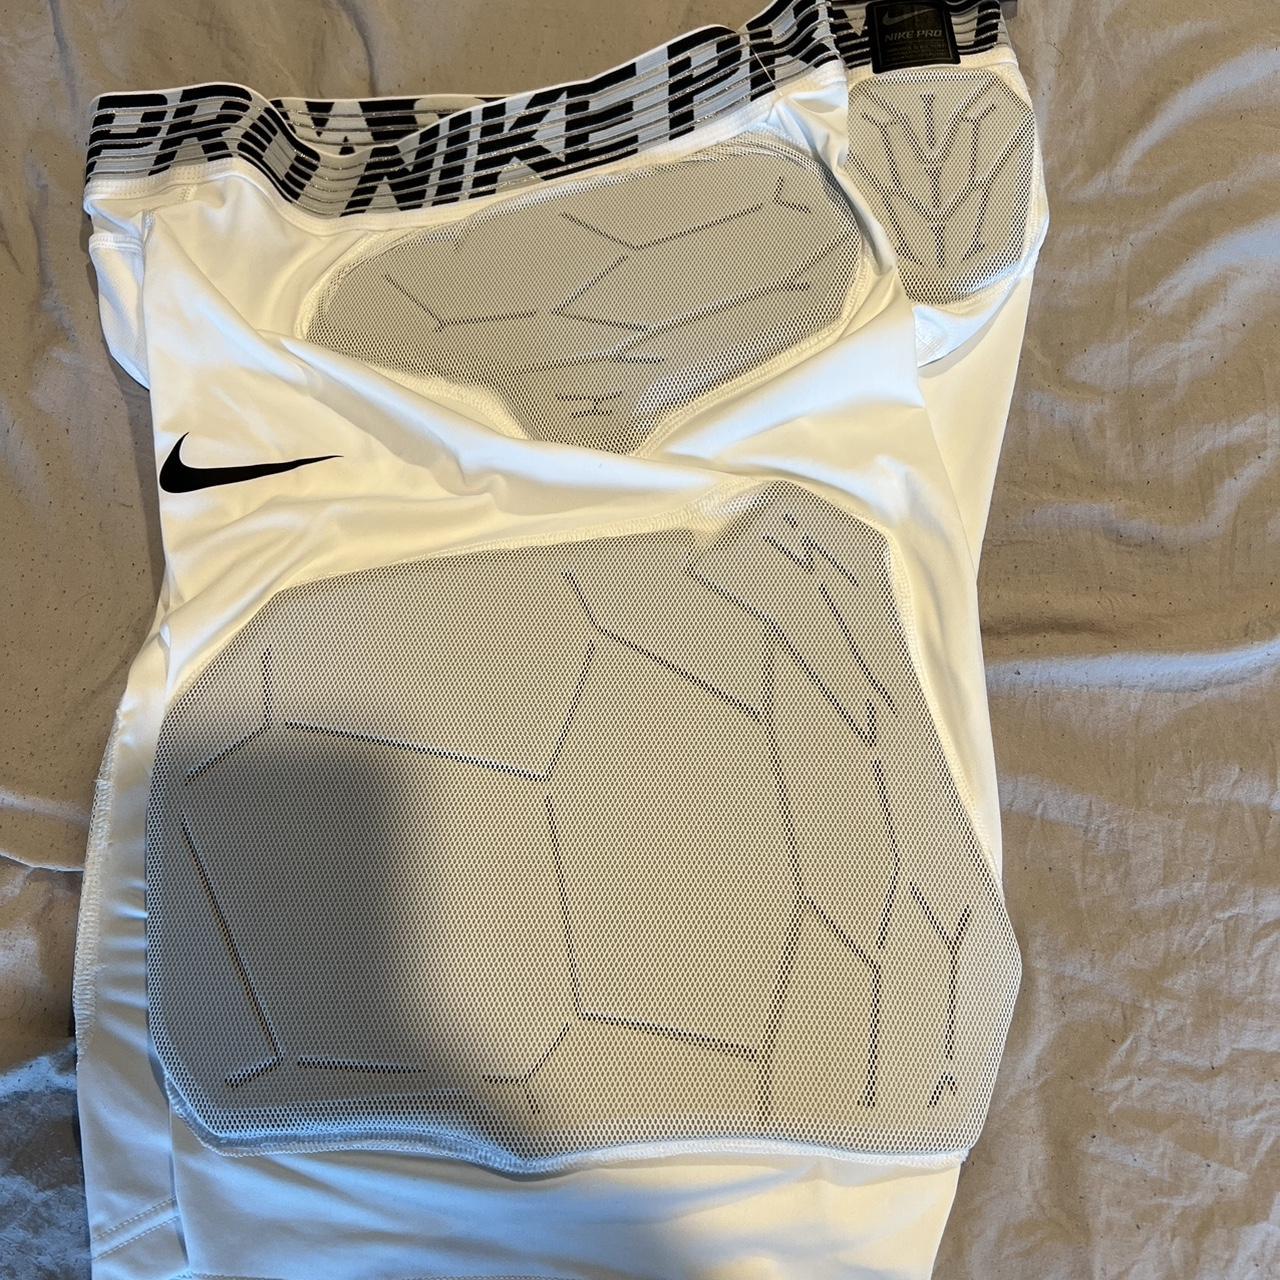 Nike Pro Hyperstrong Padded White Compression Shorts - Depop